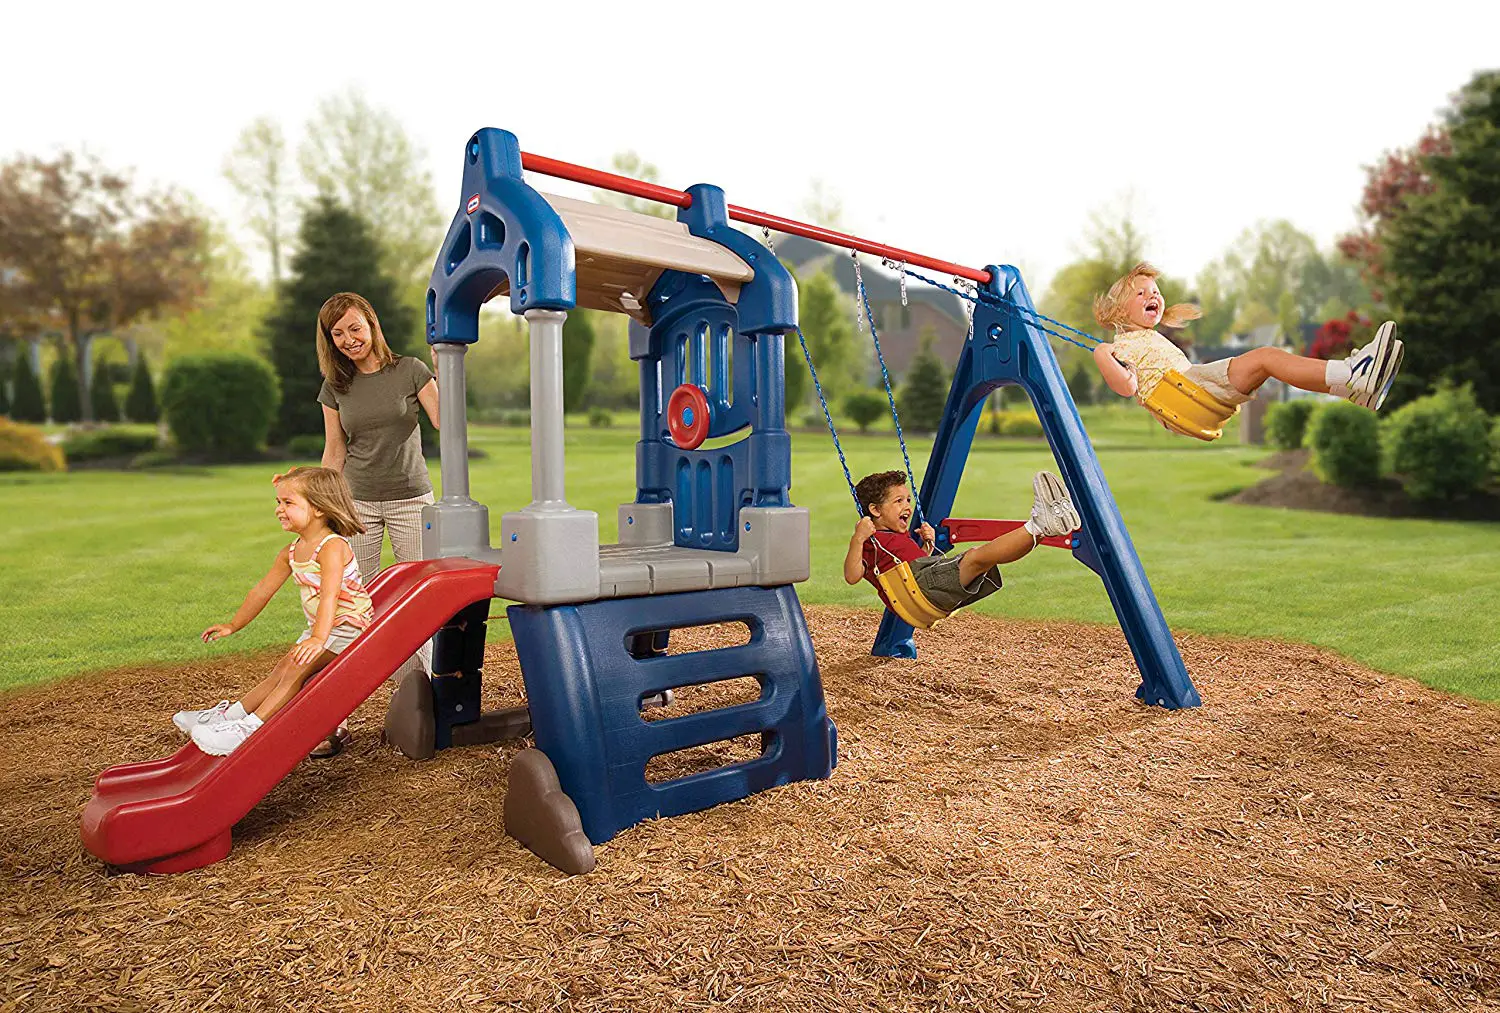 The Little Tikes Clubhouse Swing Set aids children's physical development.